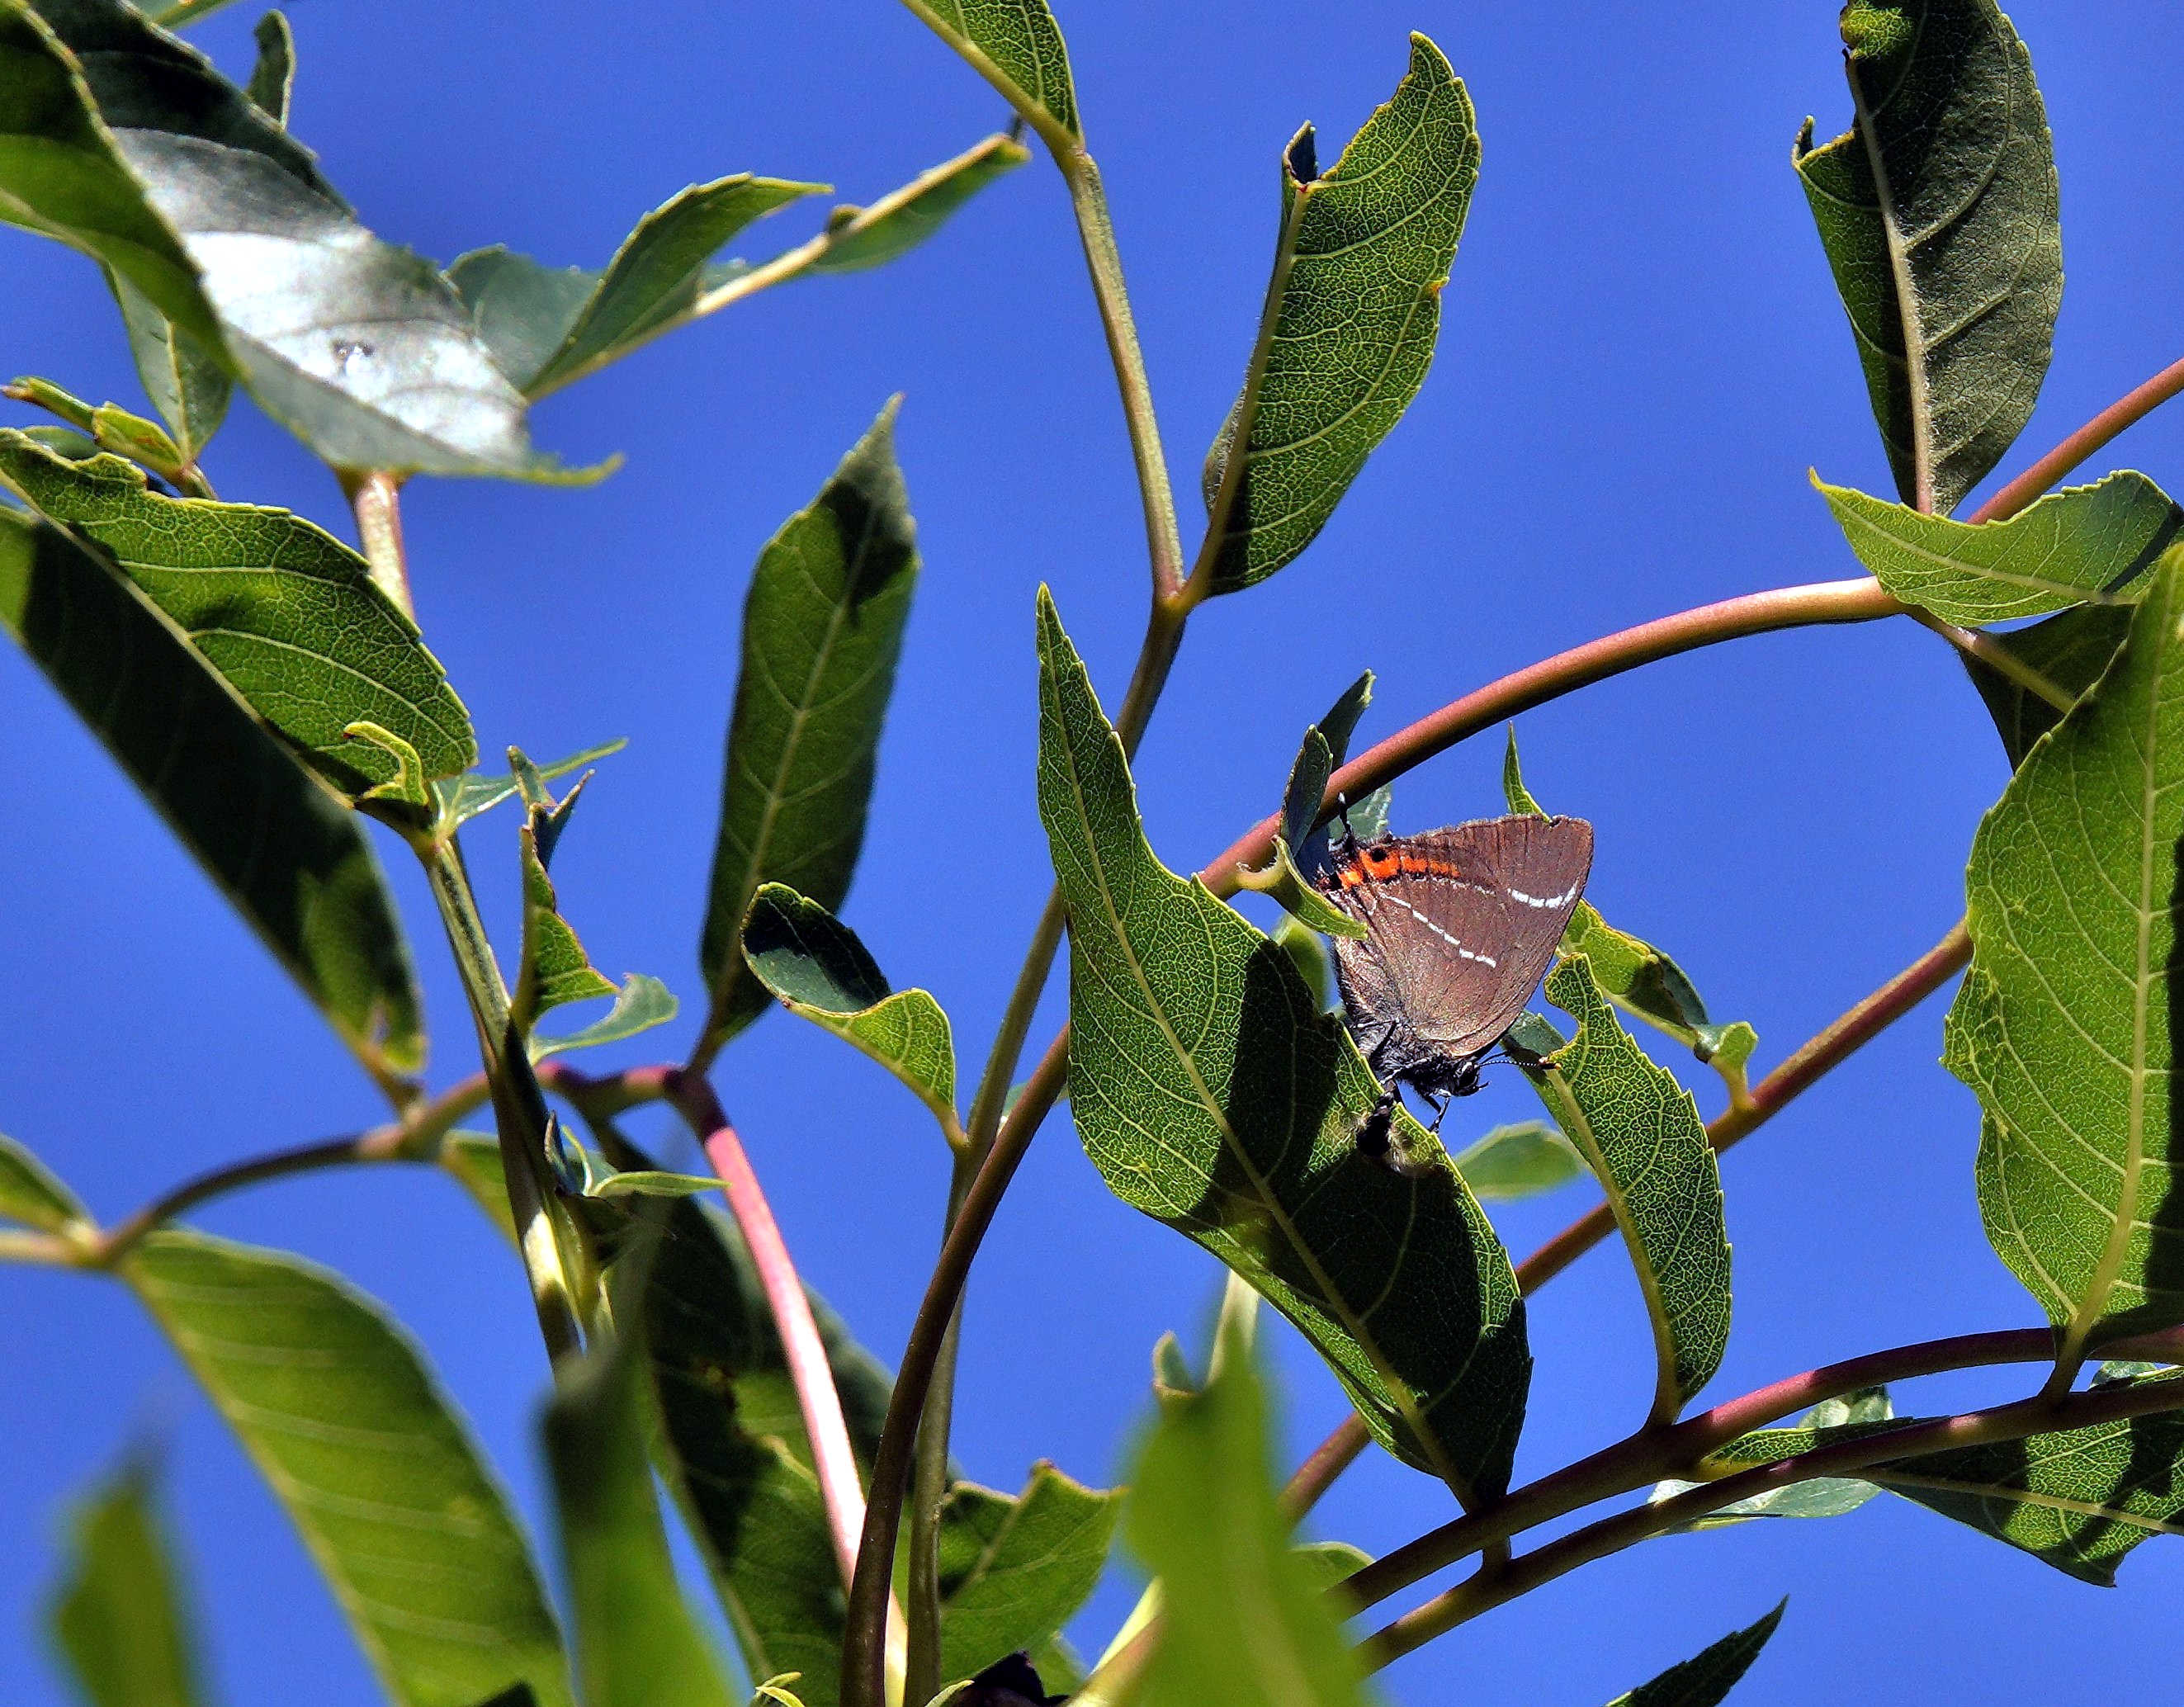 Like the Purple, the White-letter Hairstreak is an arboreal species spending much of its time at the top of elm and other trees. Ash trees in particular are well liked with them having a good helping of aphid homey dew for them to feed from.